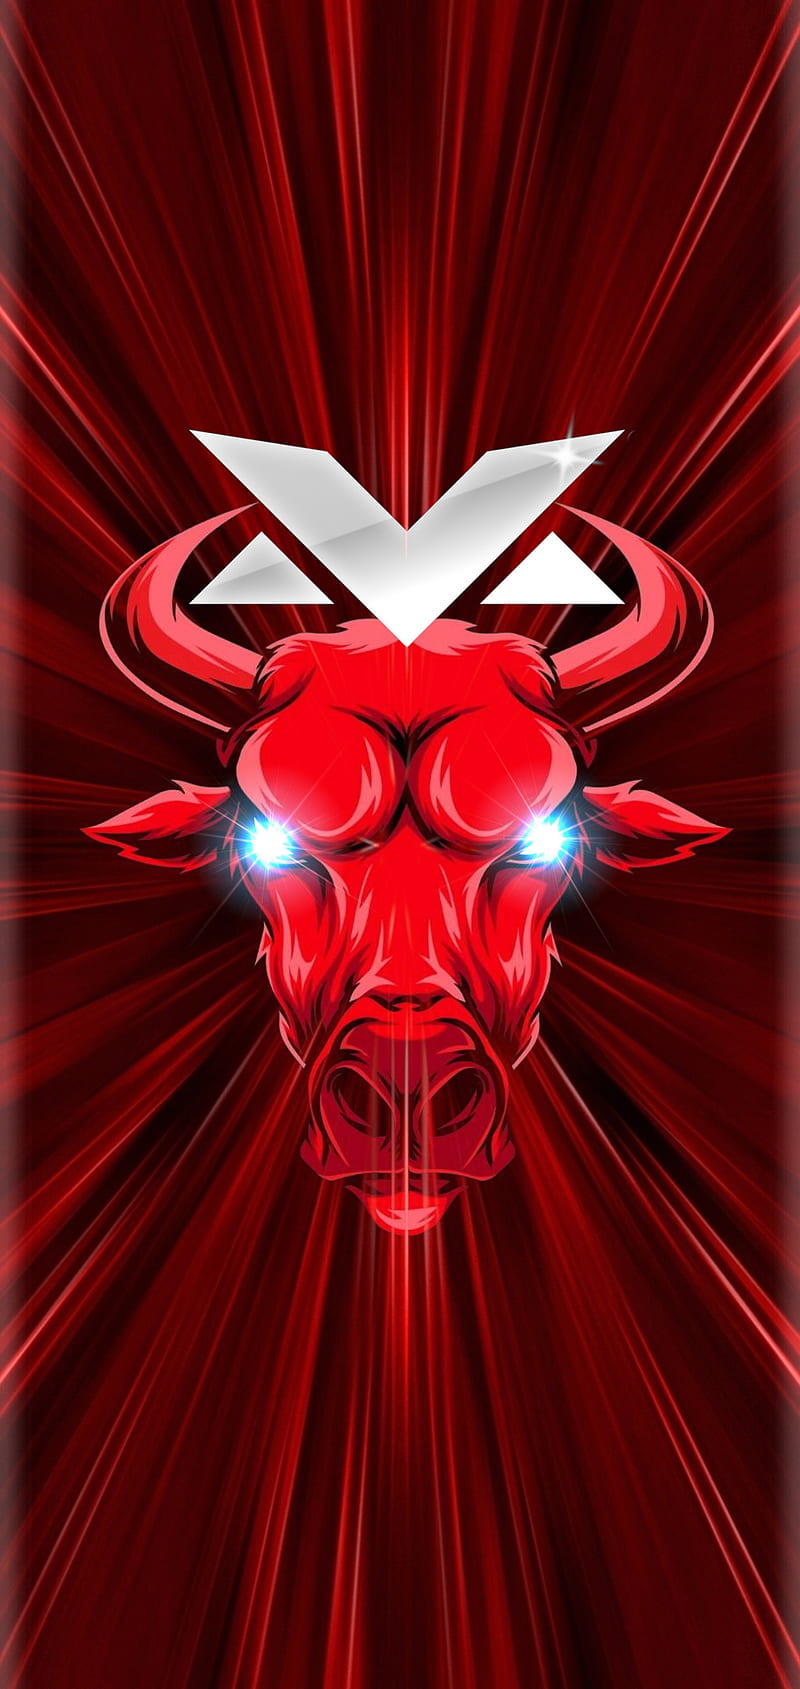 Redbull Max Abstract Android Black Bull F1 Iphone Red Verstappen Hd Mobile Wallpaper Peakpx